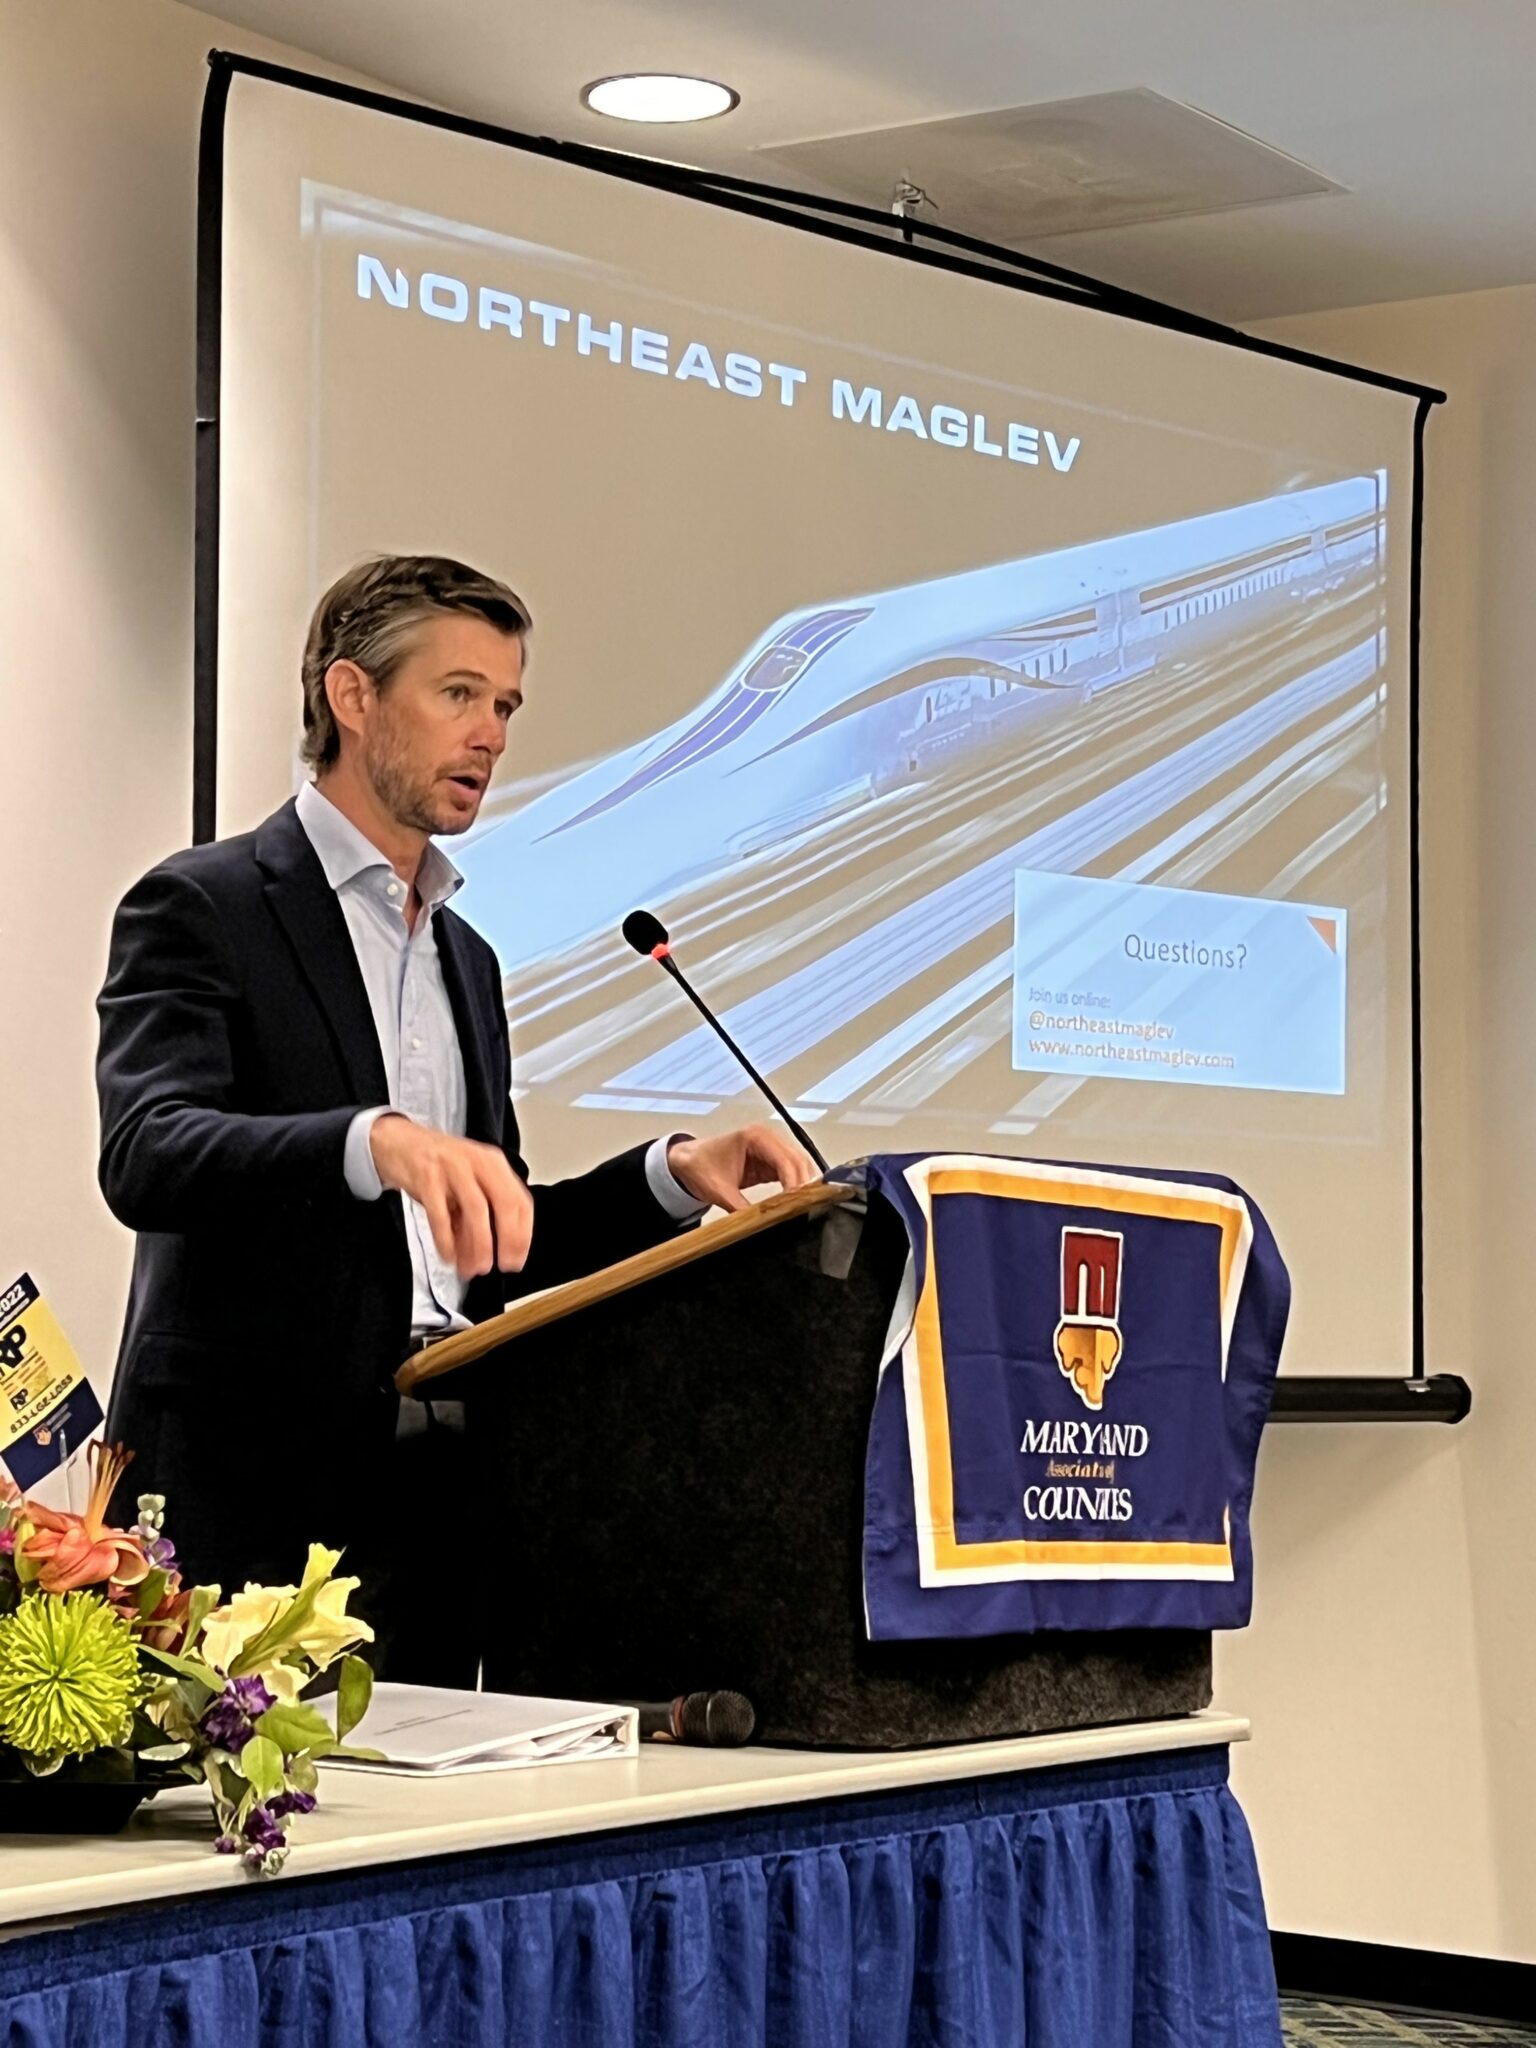 Northeast Maglev Attends 2022 MACo Summer Conference